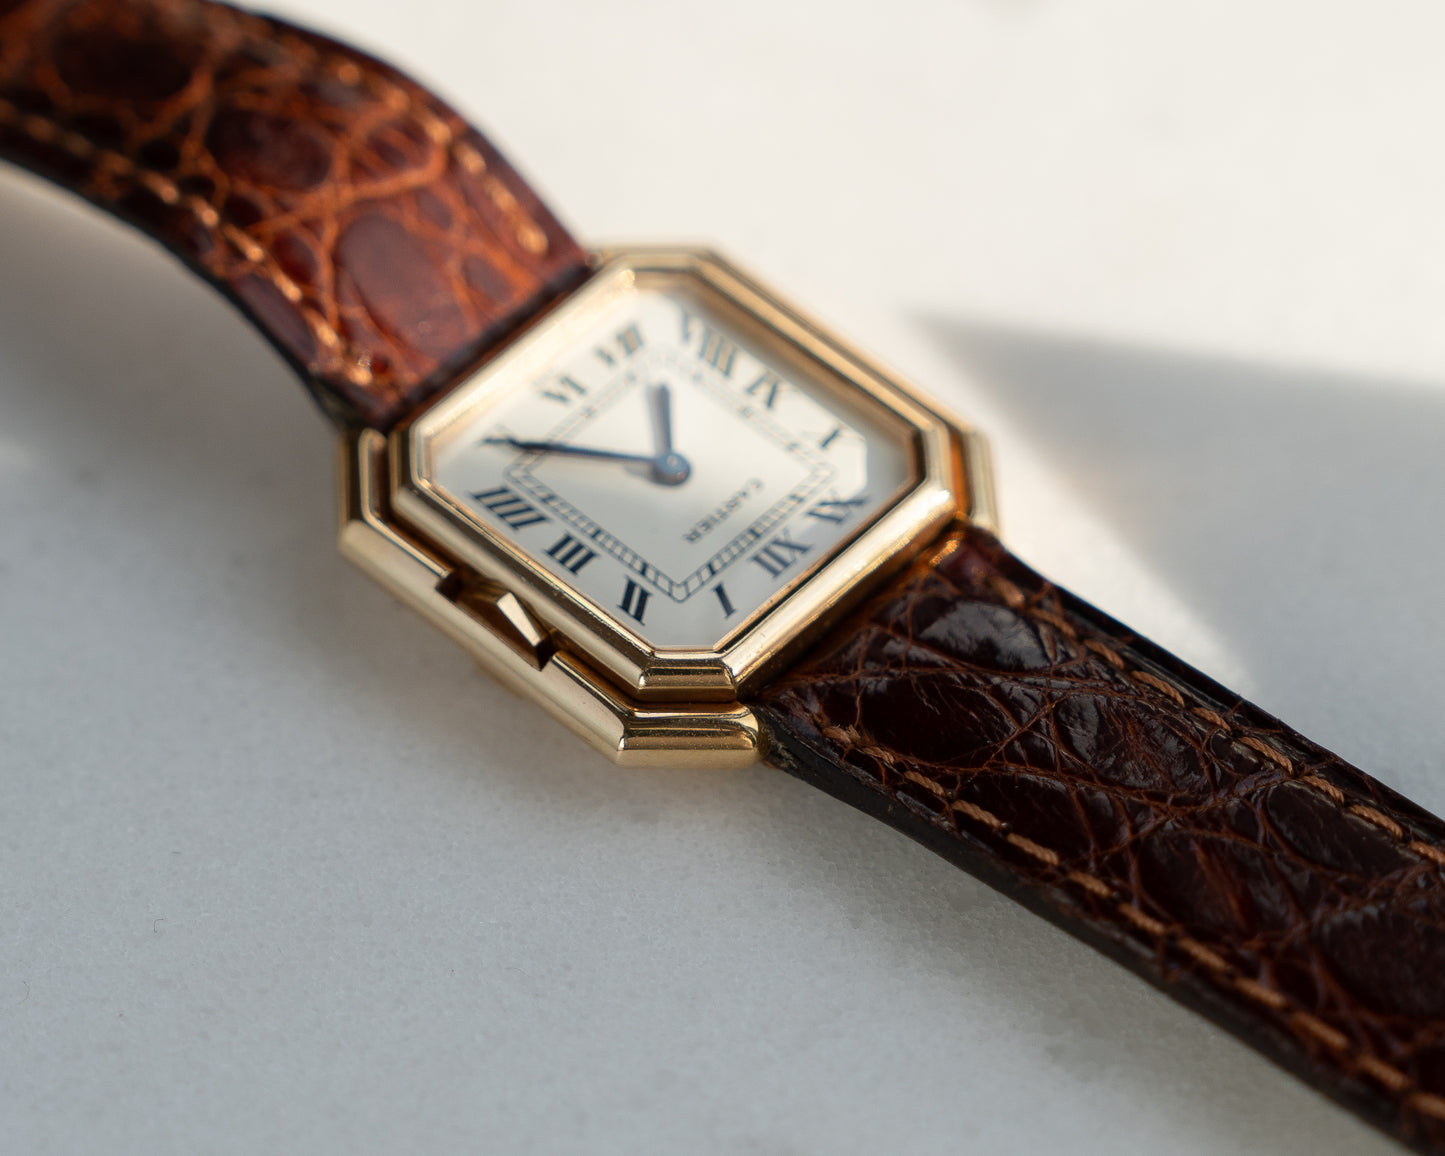 Cartier Ceinture Yellow Gold, Paris Dial, SM - mechanical movement - box and papers